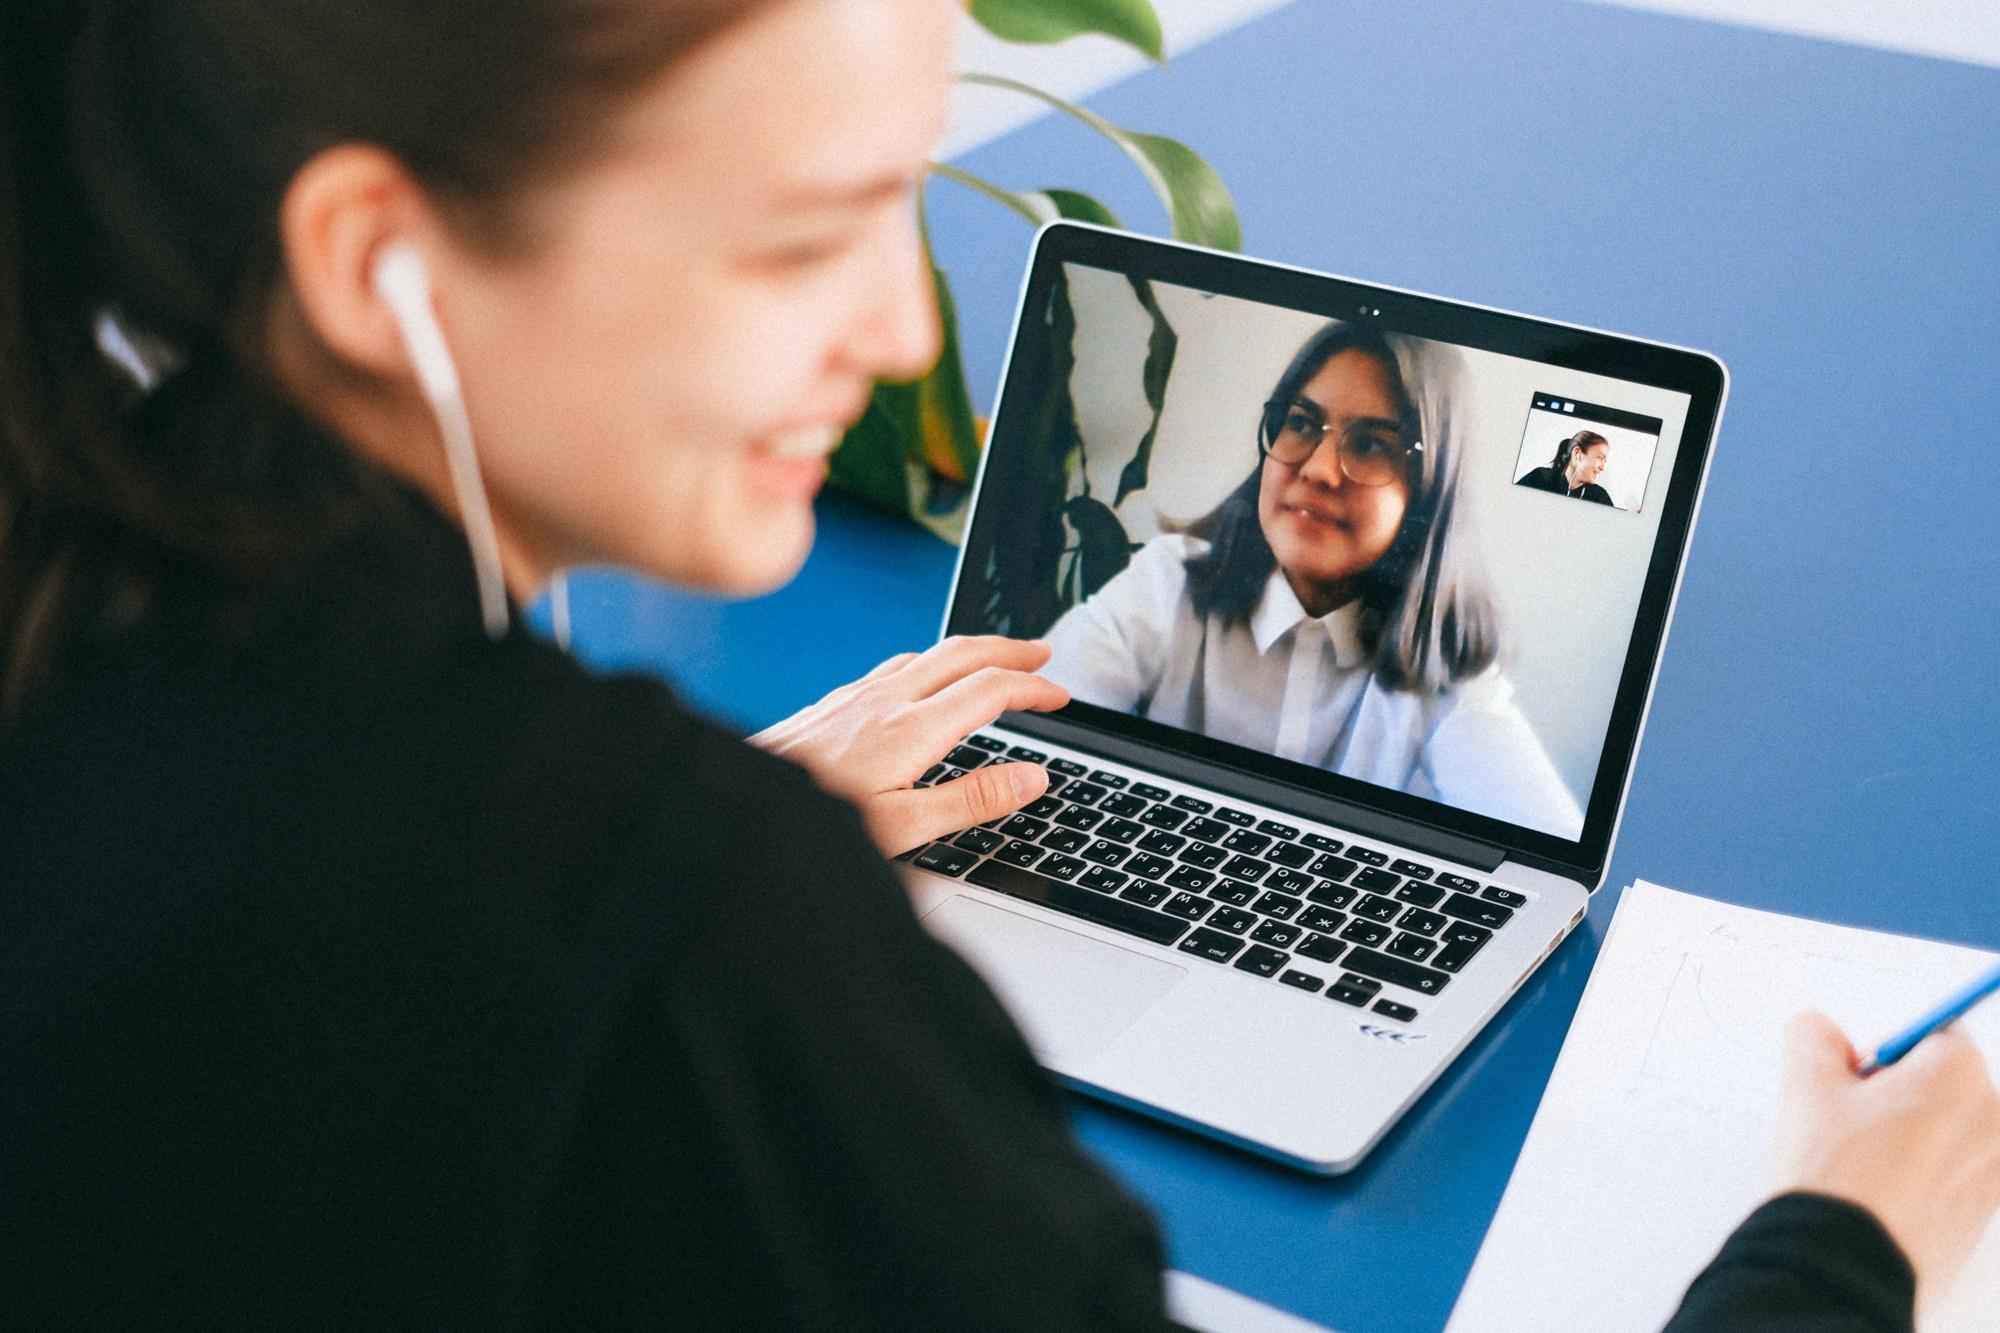 Two people on a video call using a video conferencing app